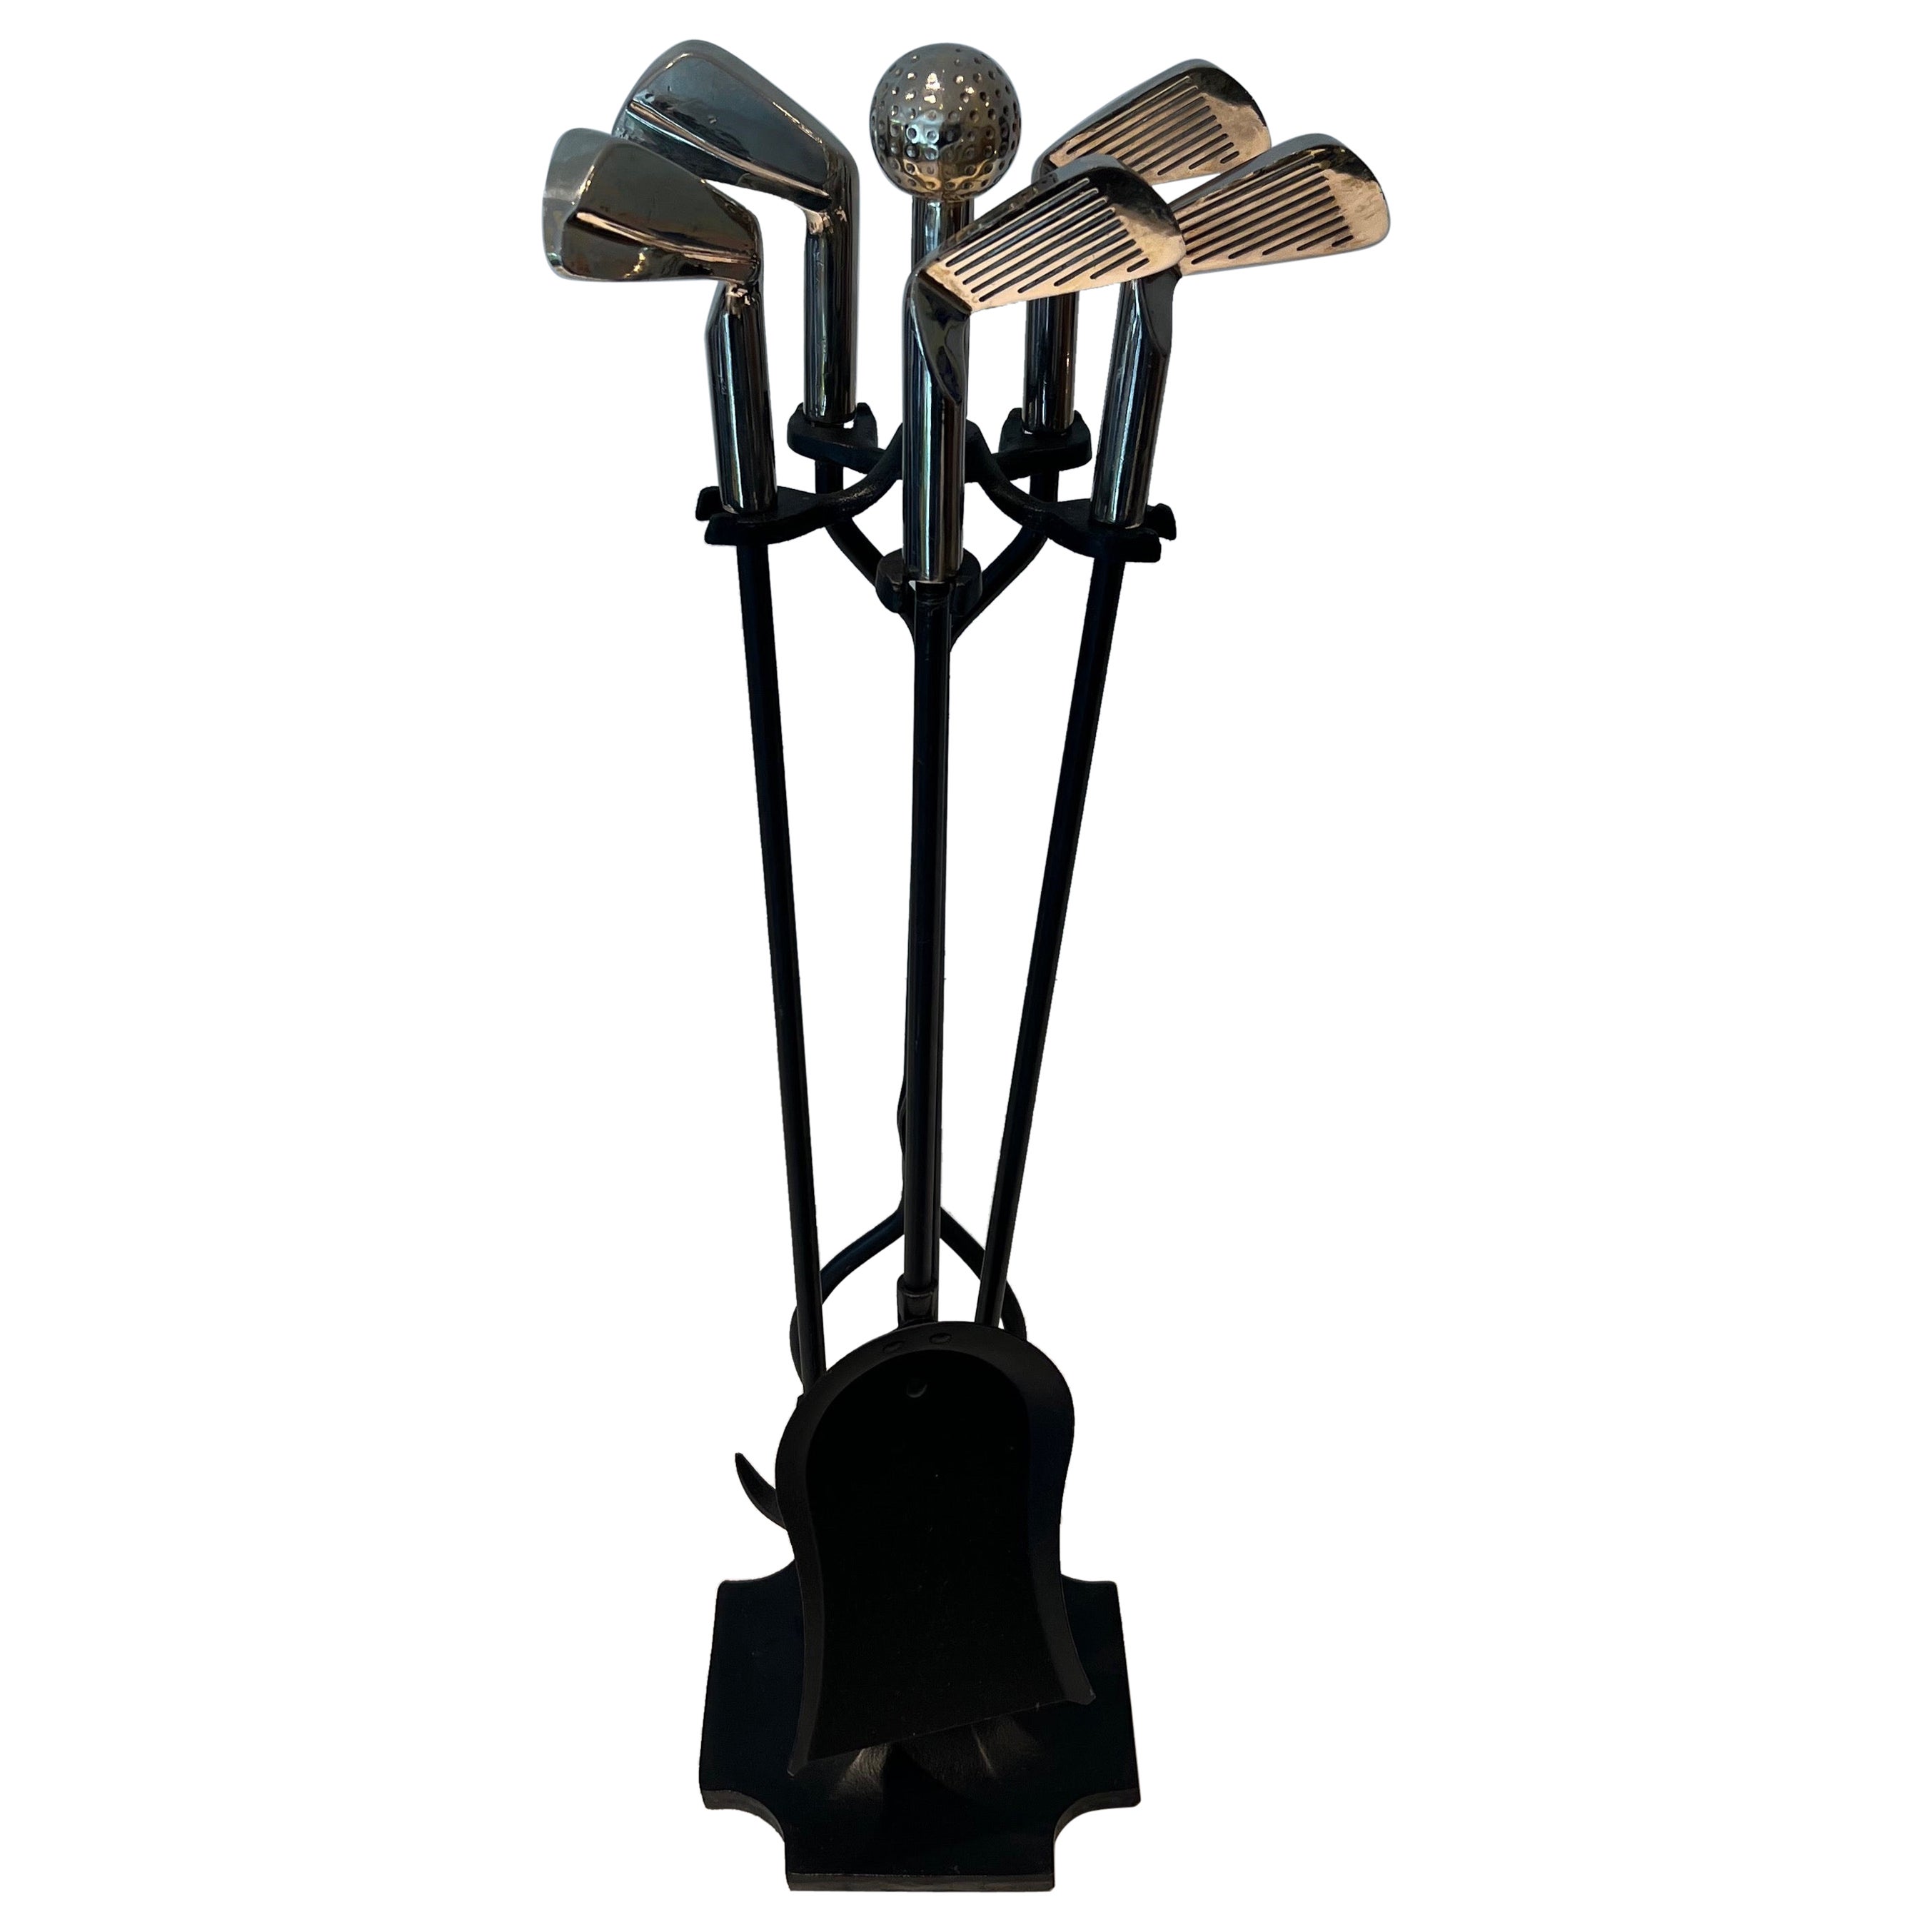 Black Lacquered Metal and Chrome Fireplace Tools on Stand "Golf" Model